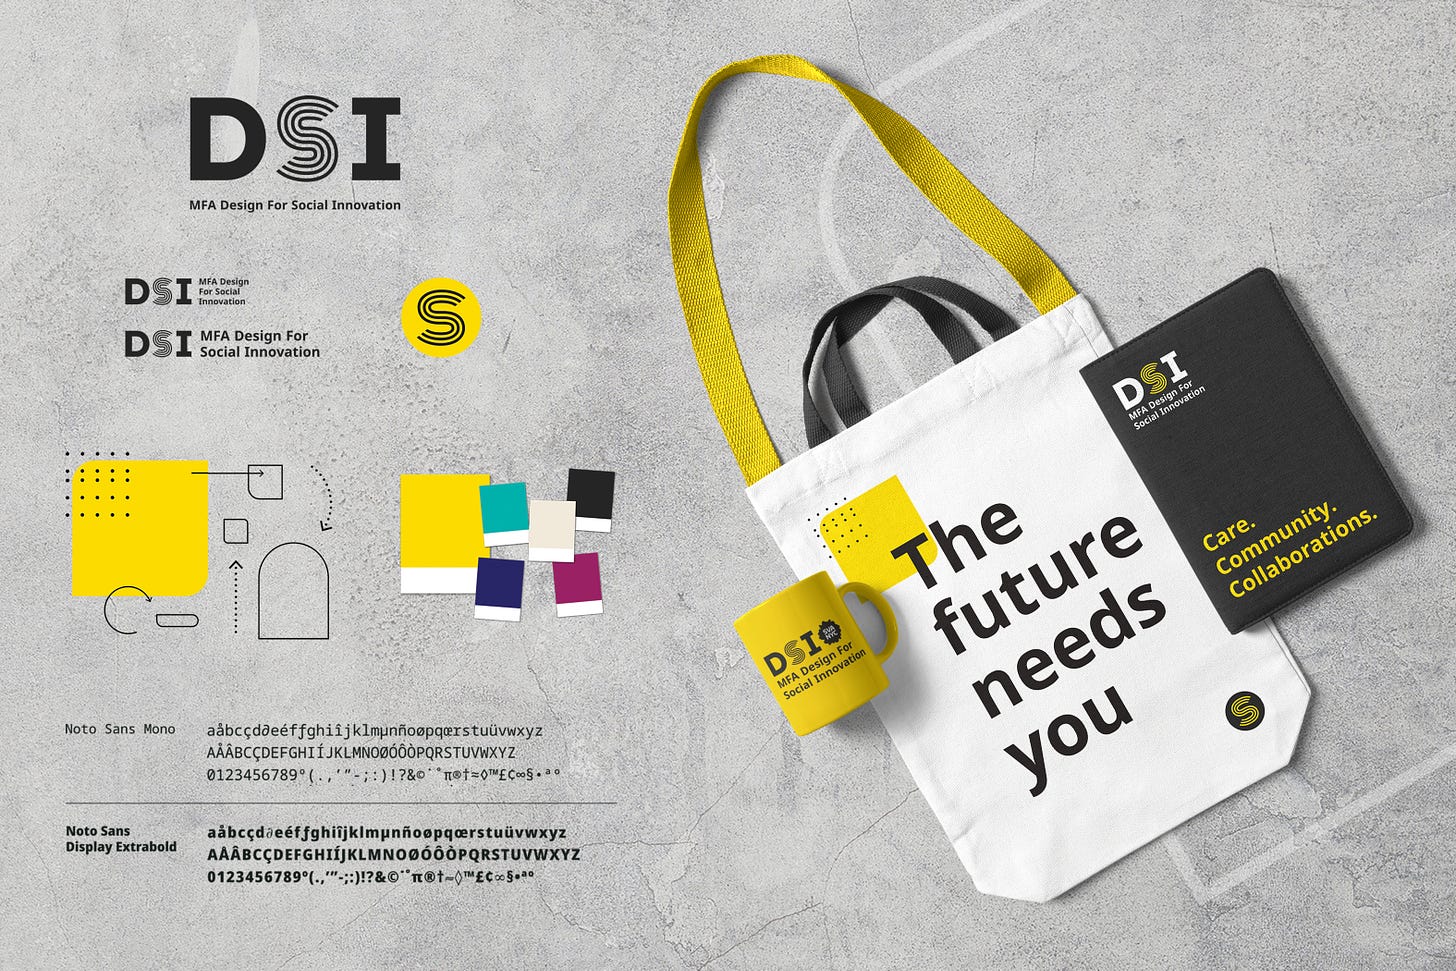 Aerial view of totebag, black book, and yellow mug. Left side shows the elements of DSI visual identity.